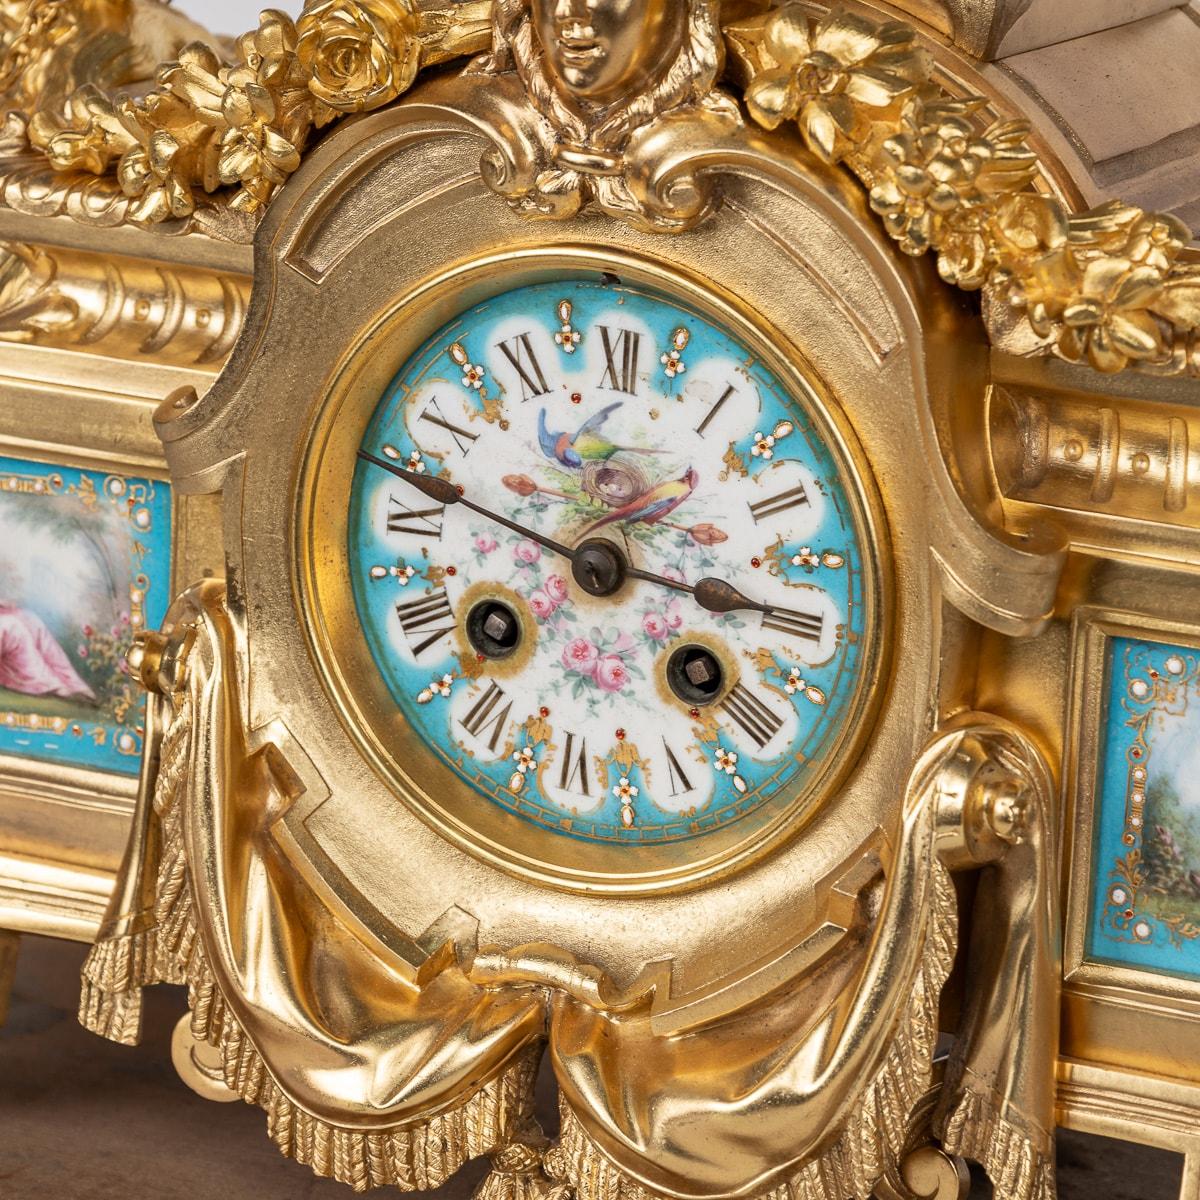 19th Century French Ormolu Mounted Sevres Style Porcelain Mantle Clock c.1870 For Sale 4